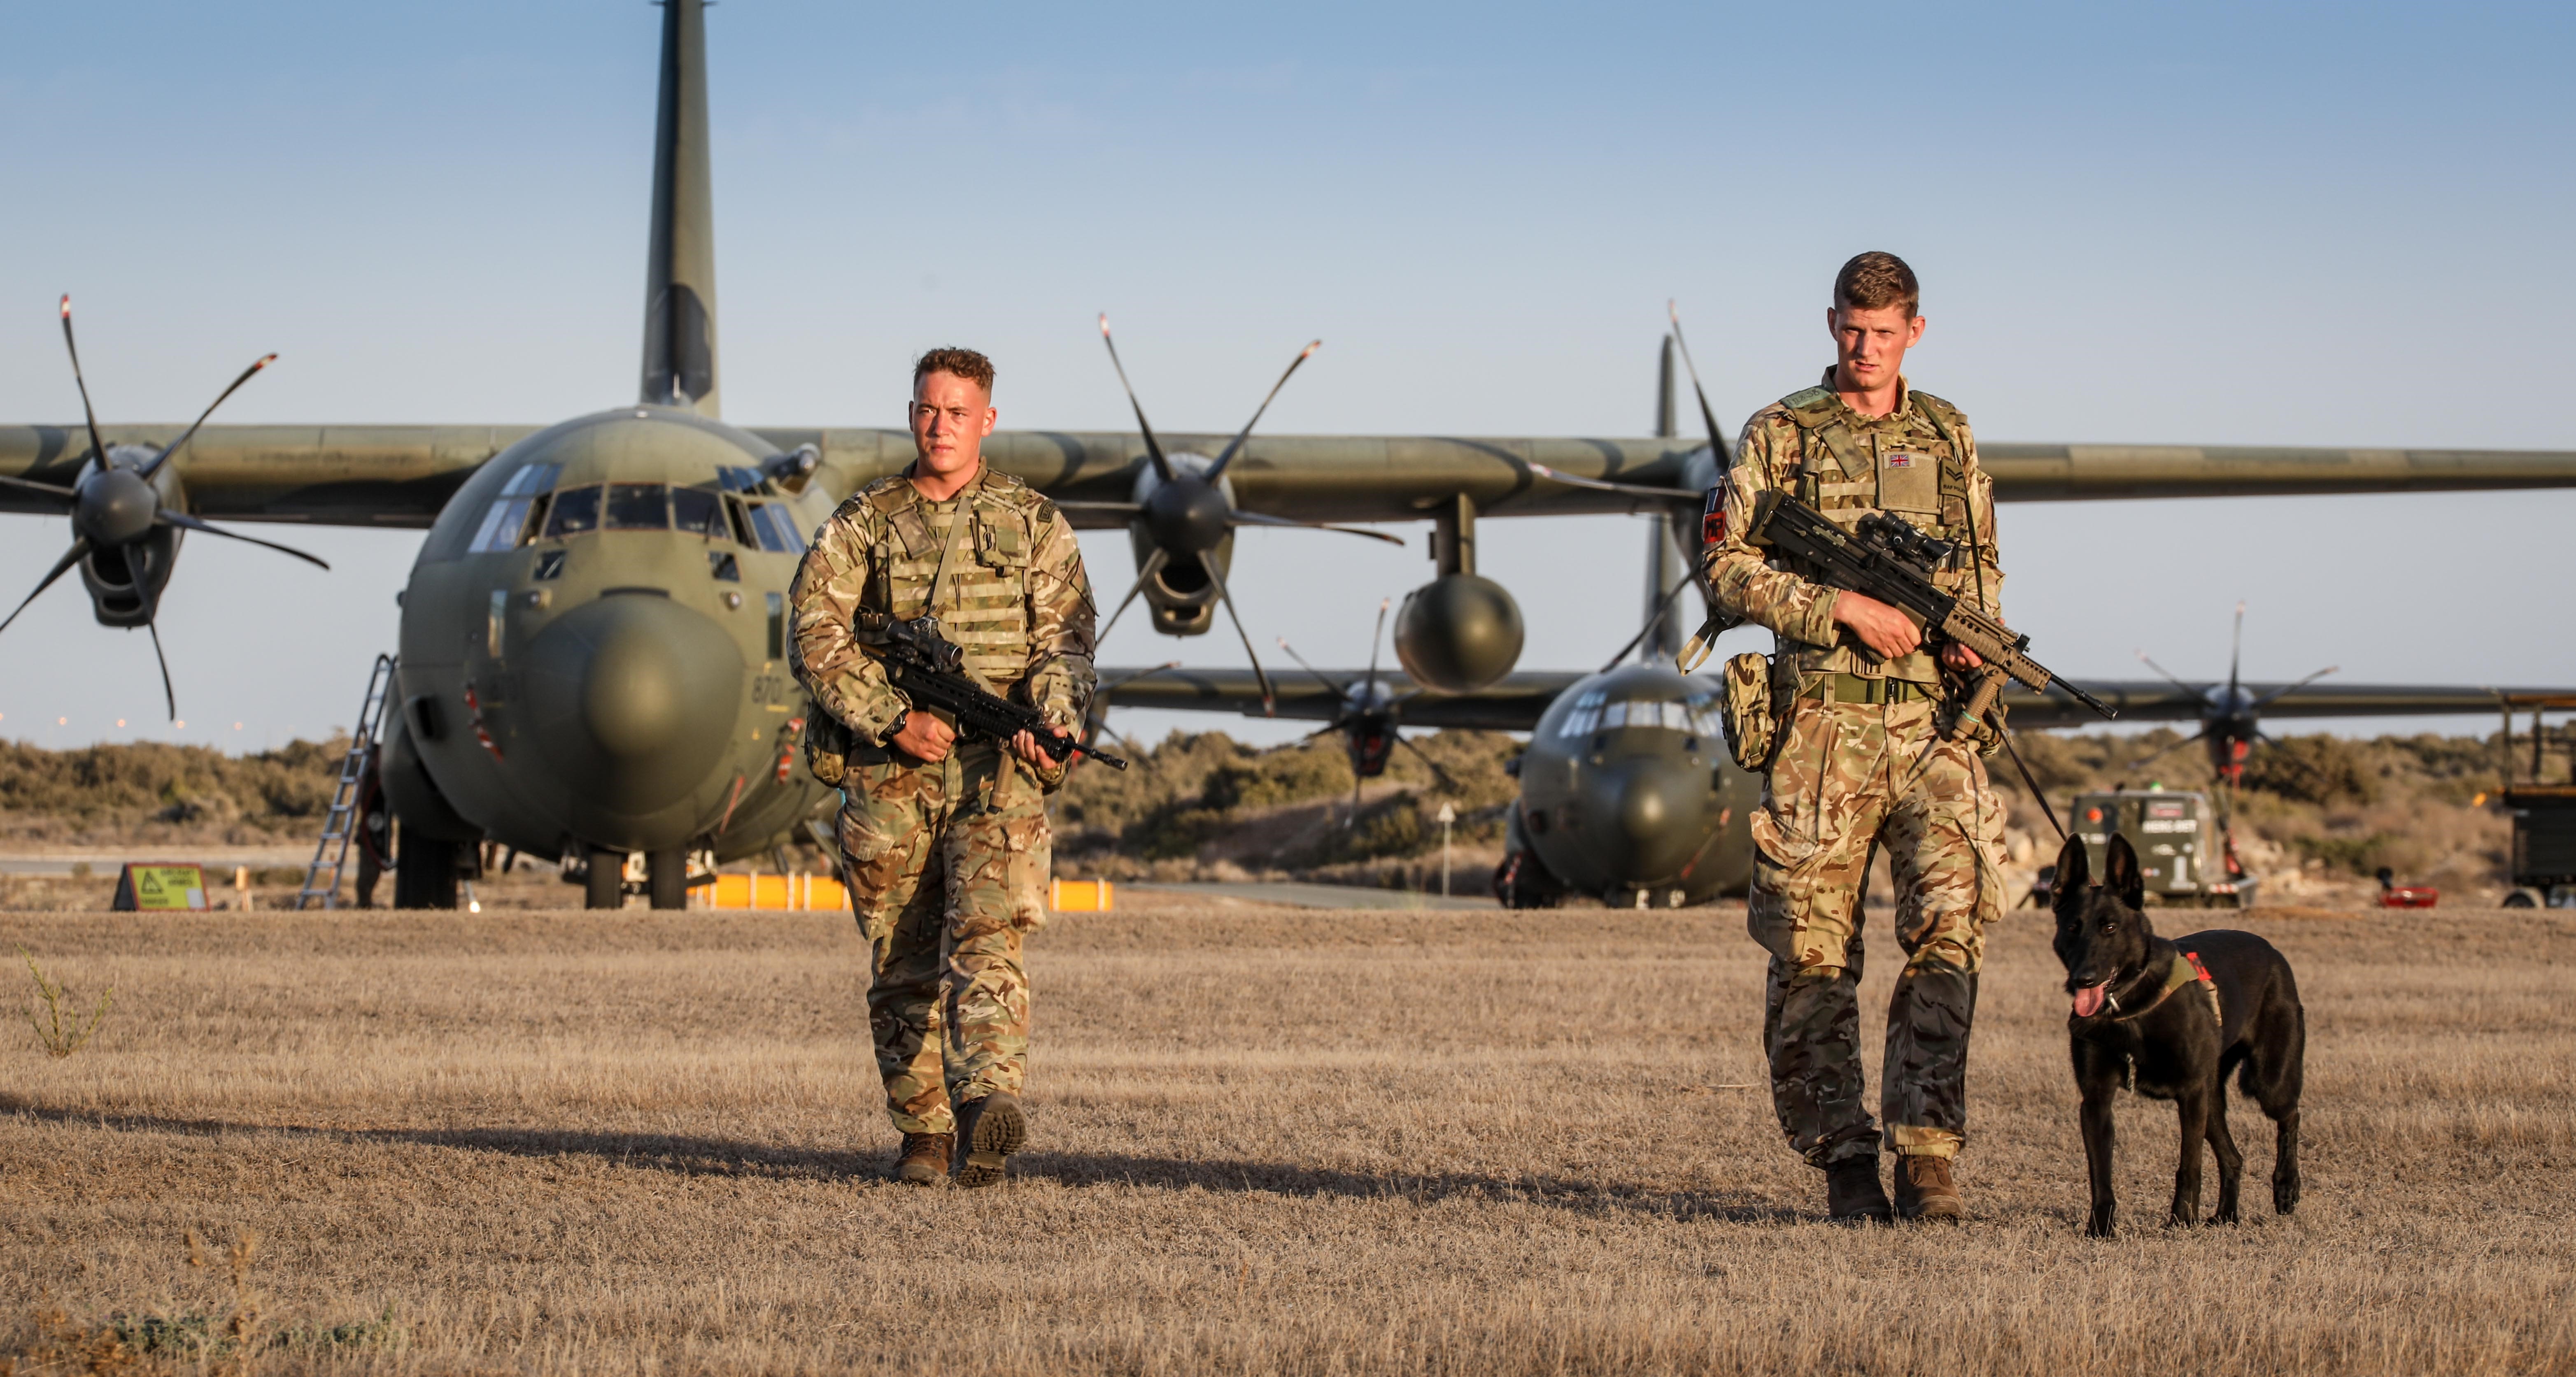 Image shows drones and surveillance equipment, with RAF Regiment holding their rifles.